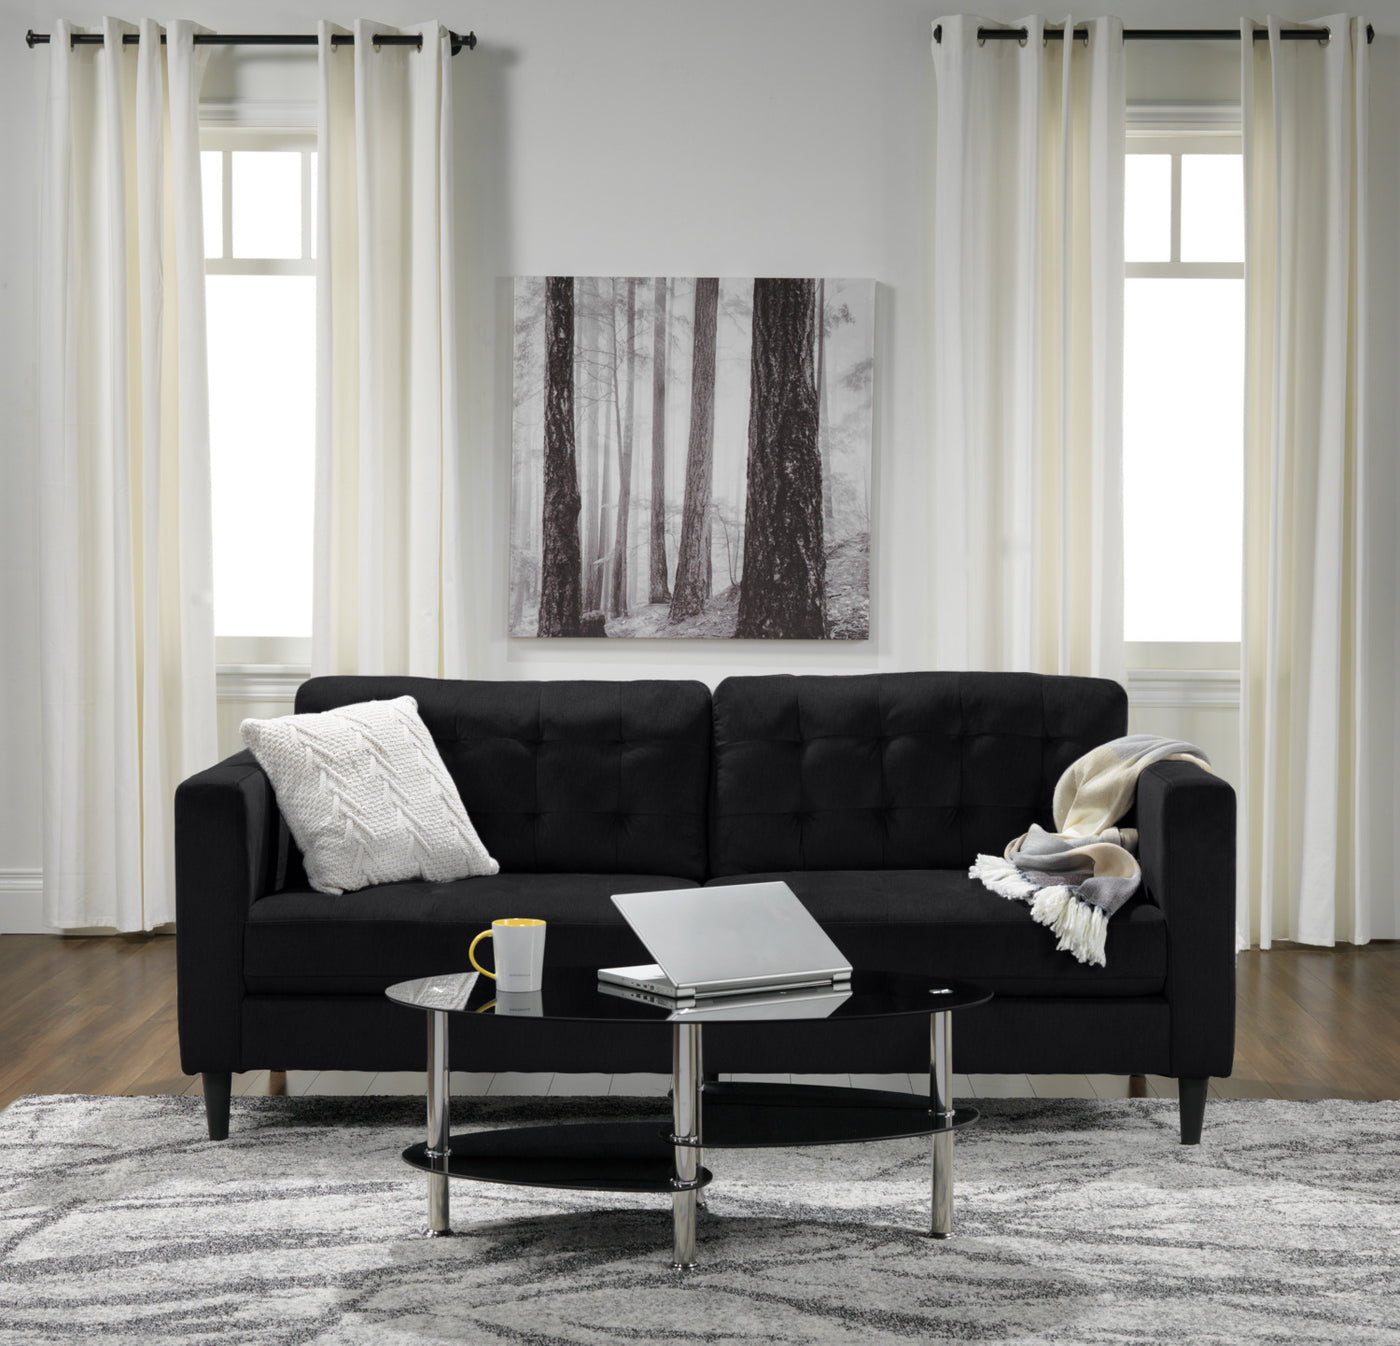 Anthena Polyester Sofa - Charcoal